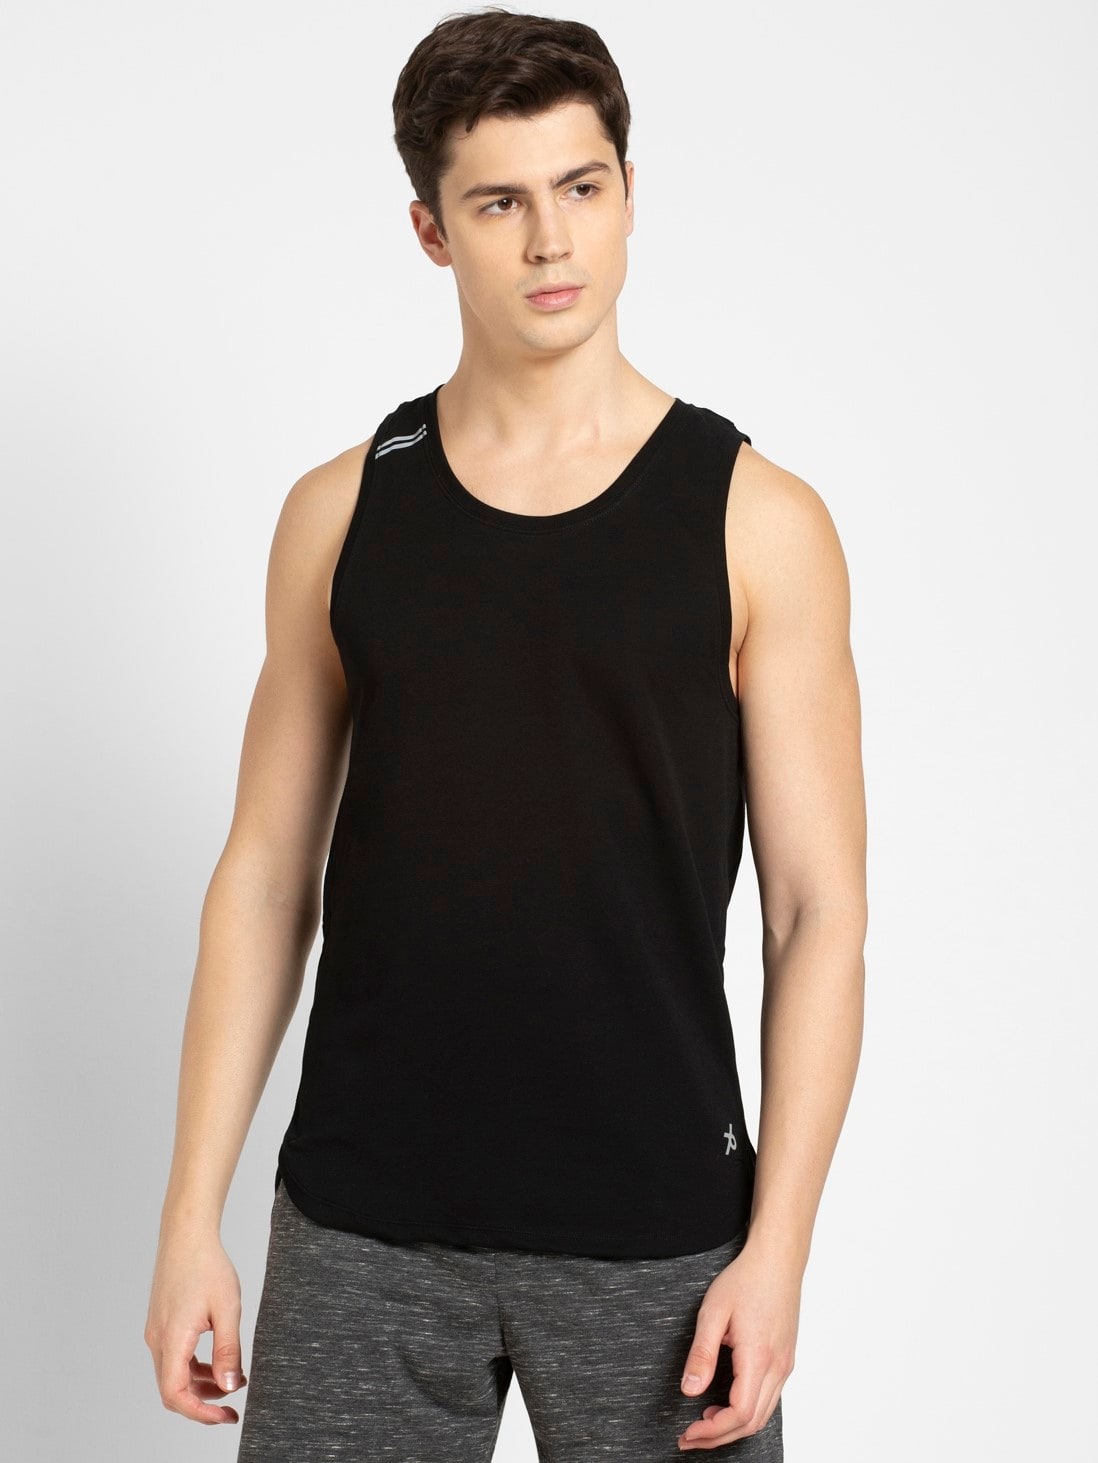 Buy Black Round Neck Sleeveless Tank Top with Breathable Mesh for Men ...